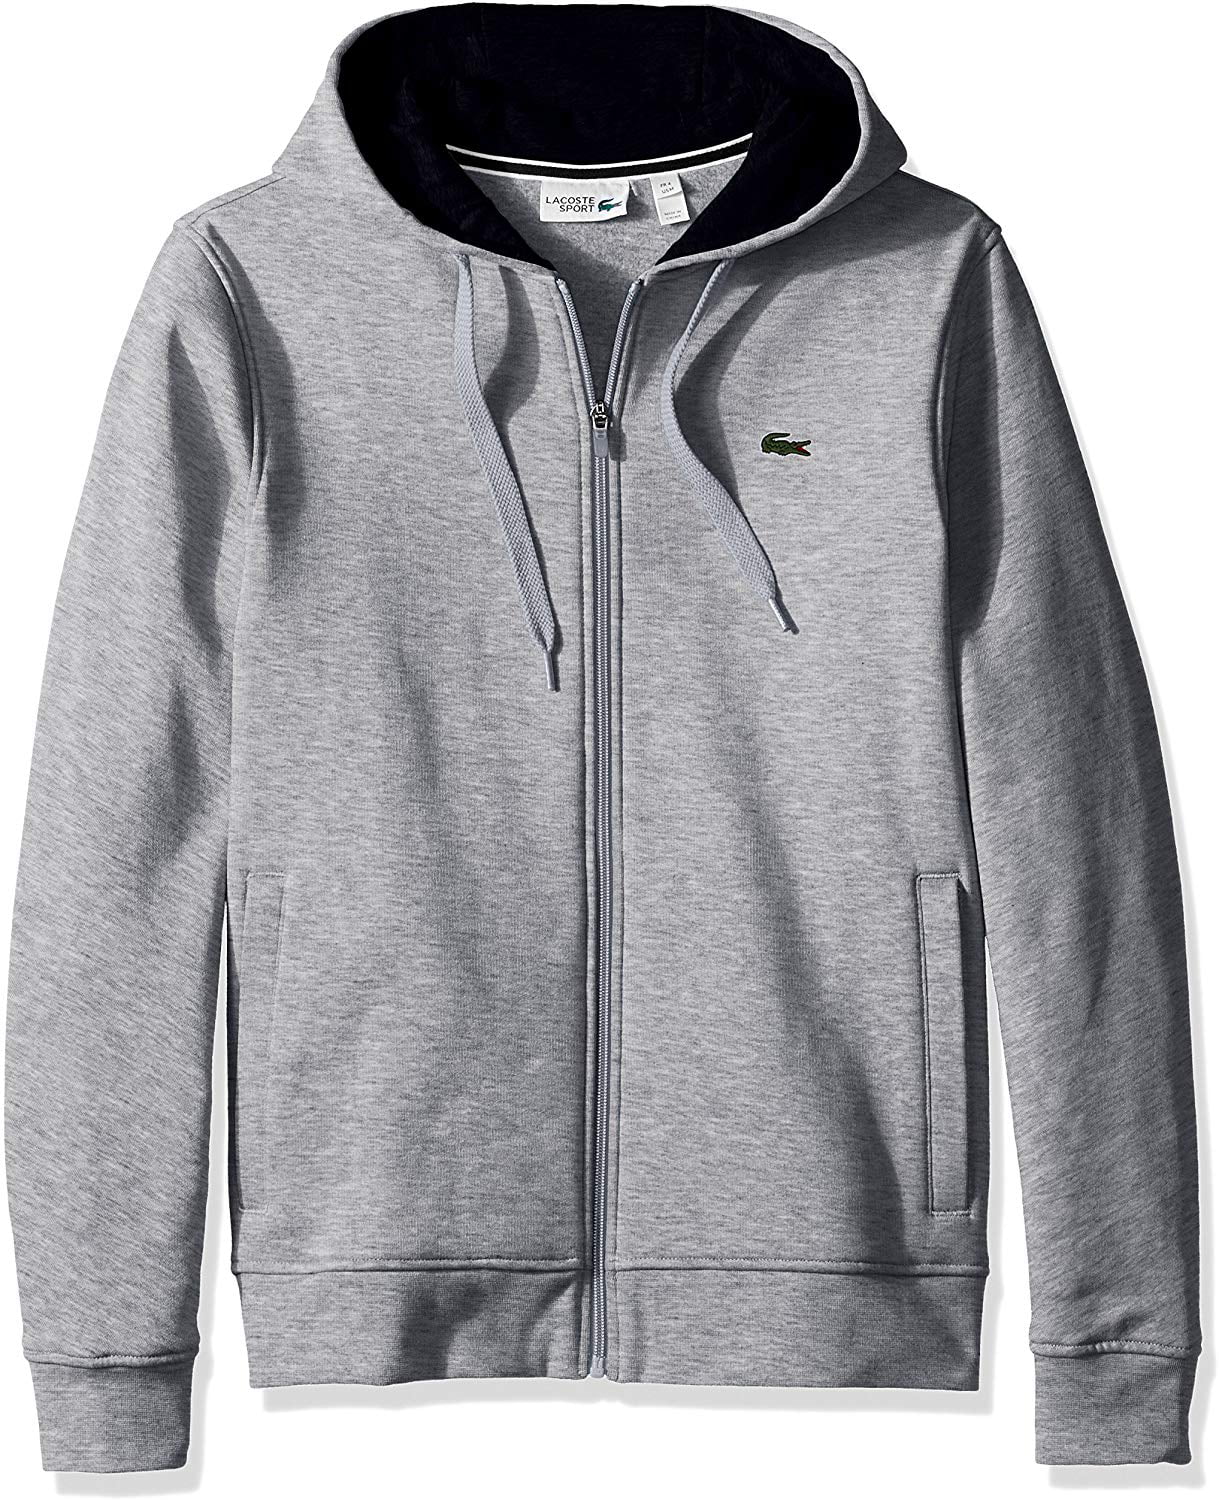 lacoste hoodie canada